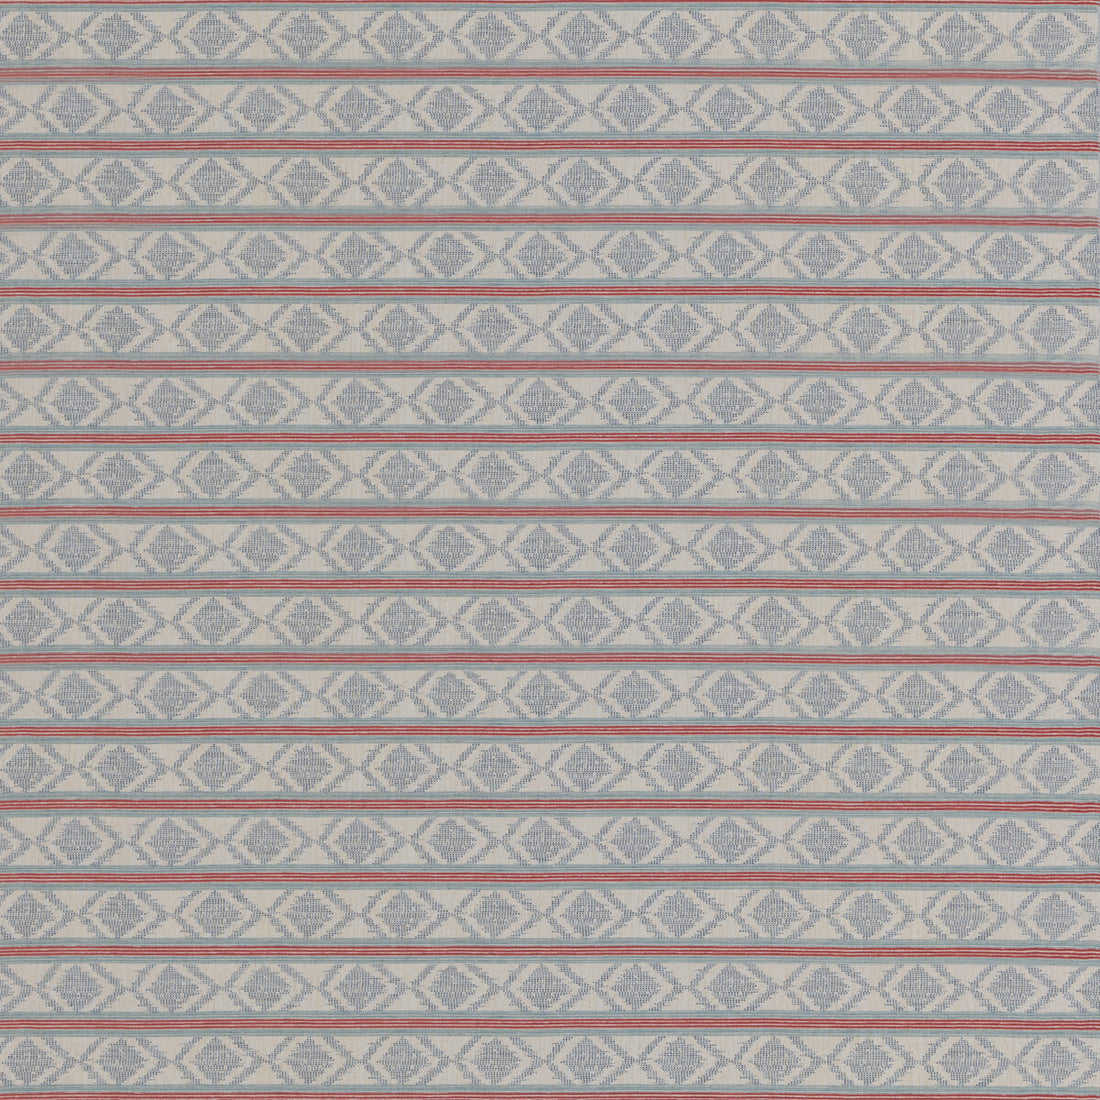 Burford Stripe fabric in red/blue color - pattern BF11034.1.0 - by G P &amp; J Baker in the Burford Weaves collection